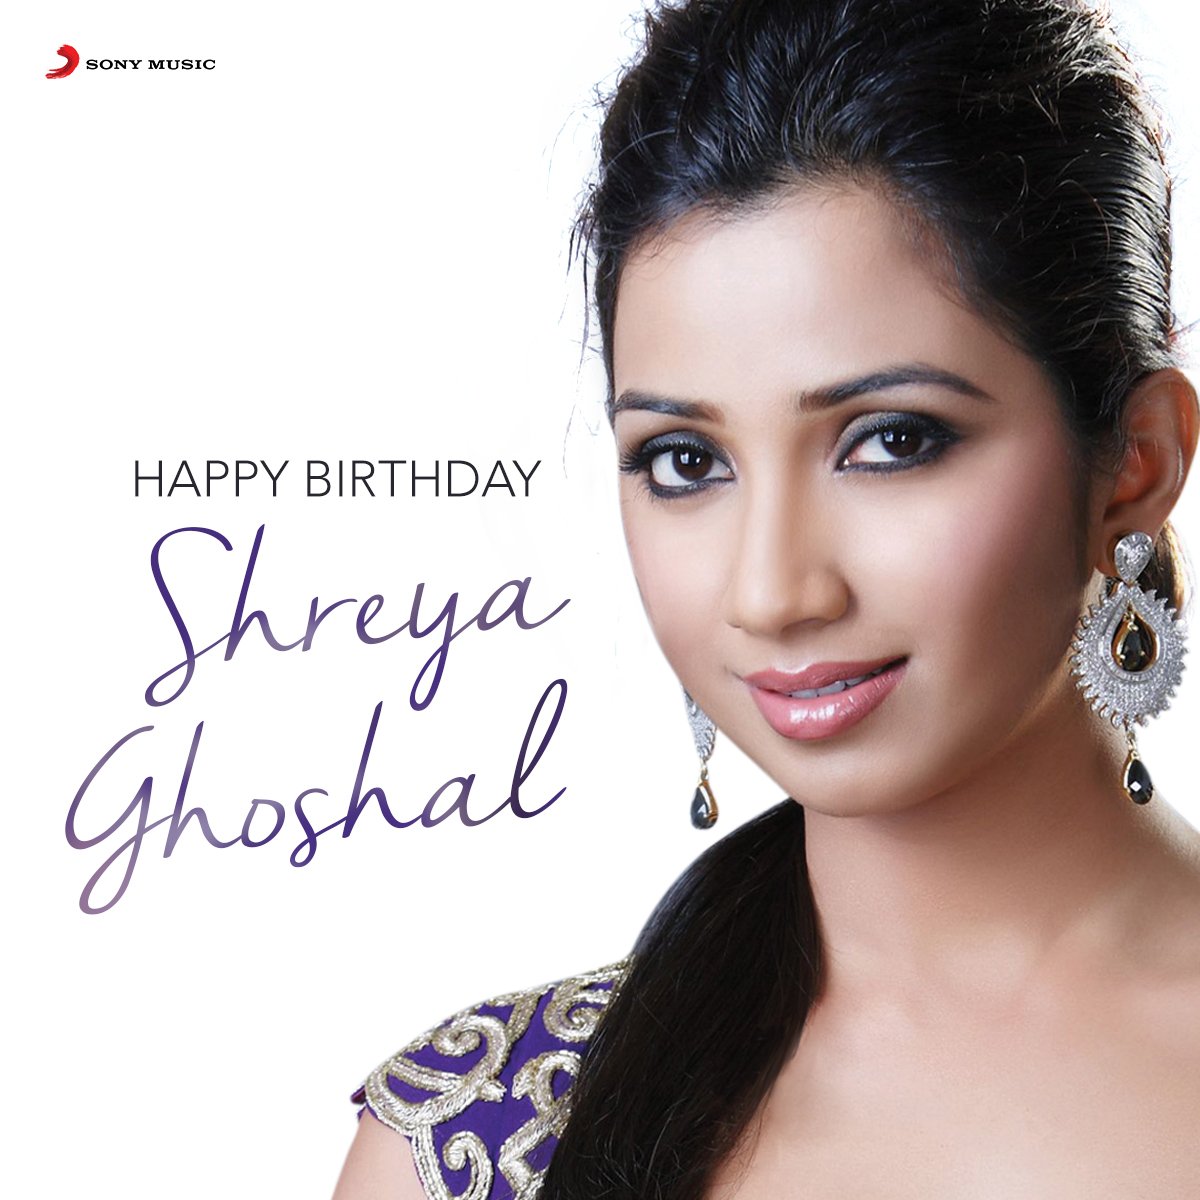 Happy birthday to the queen of music Shreya Ghoshal. 